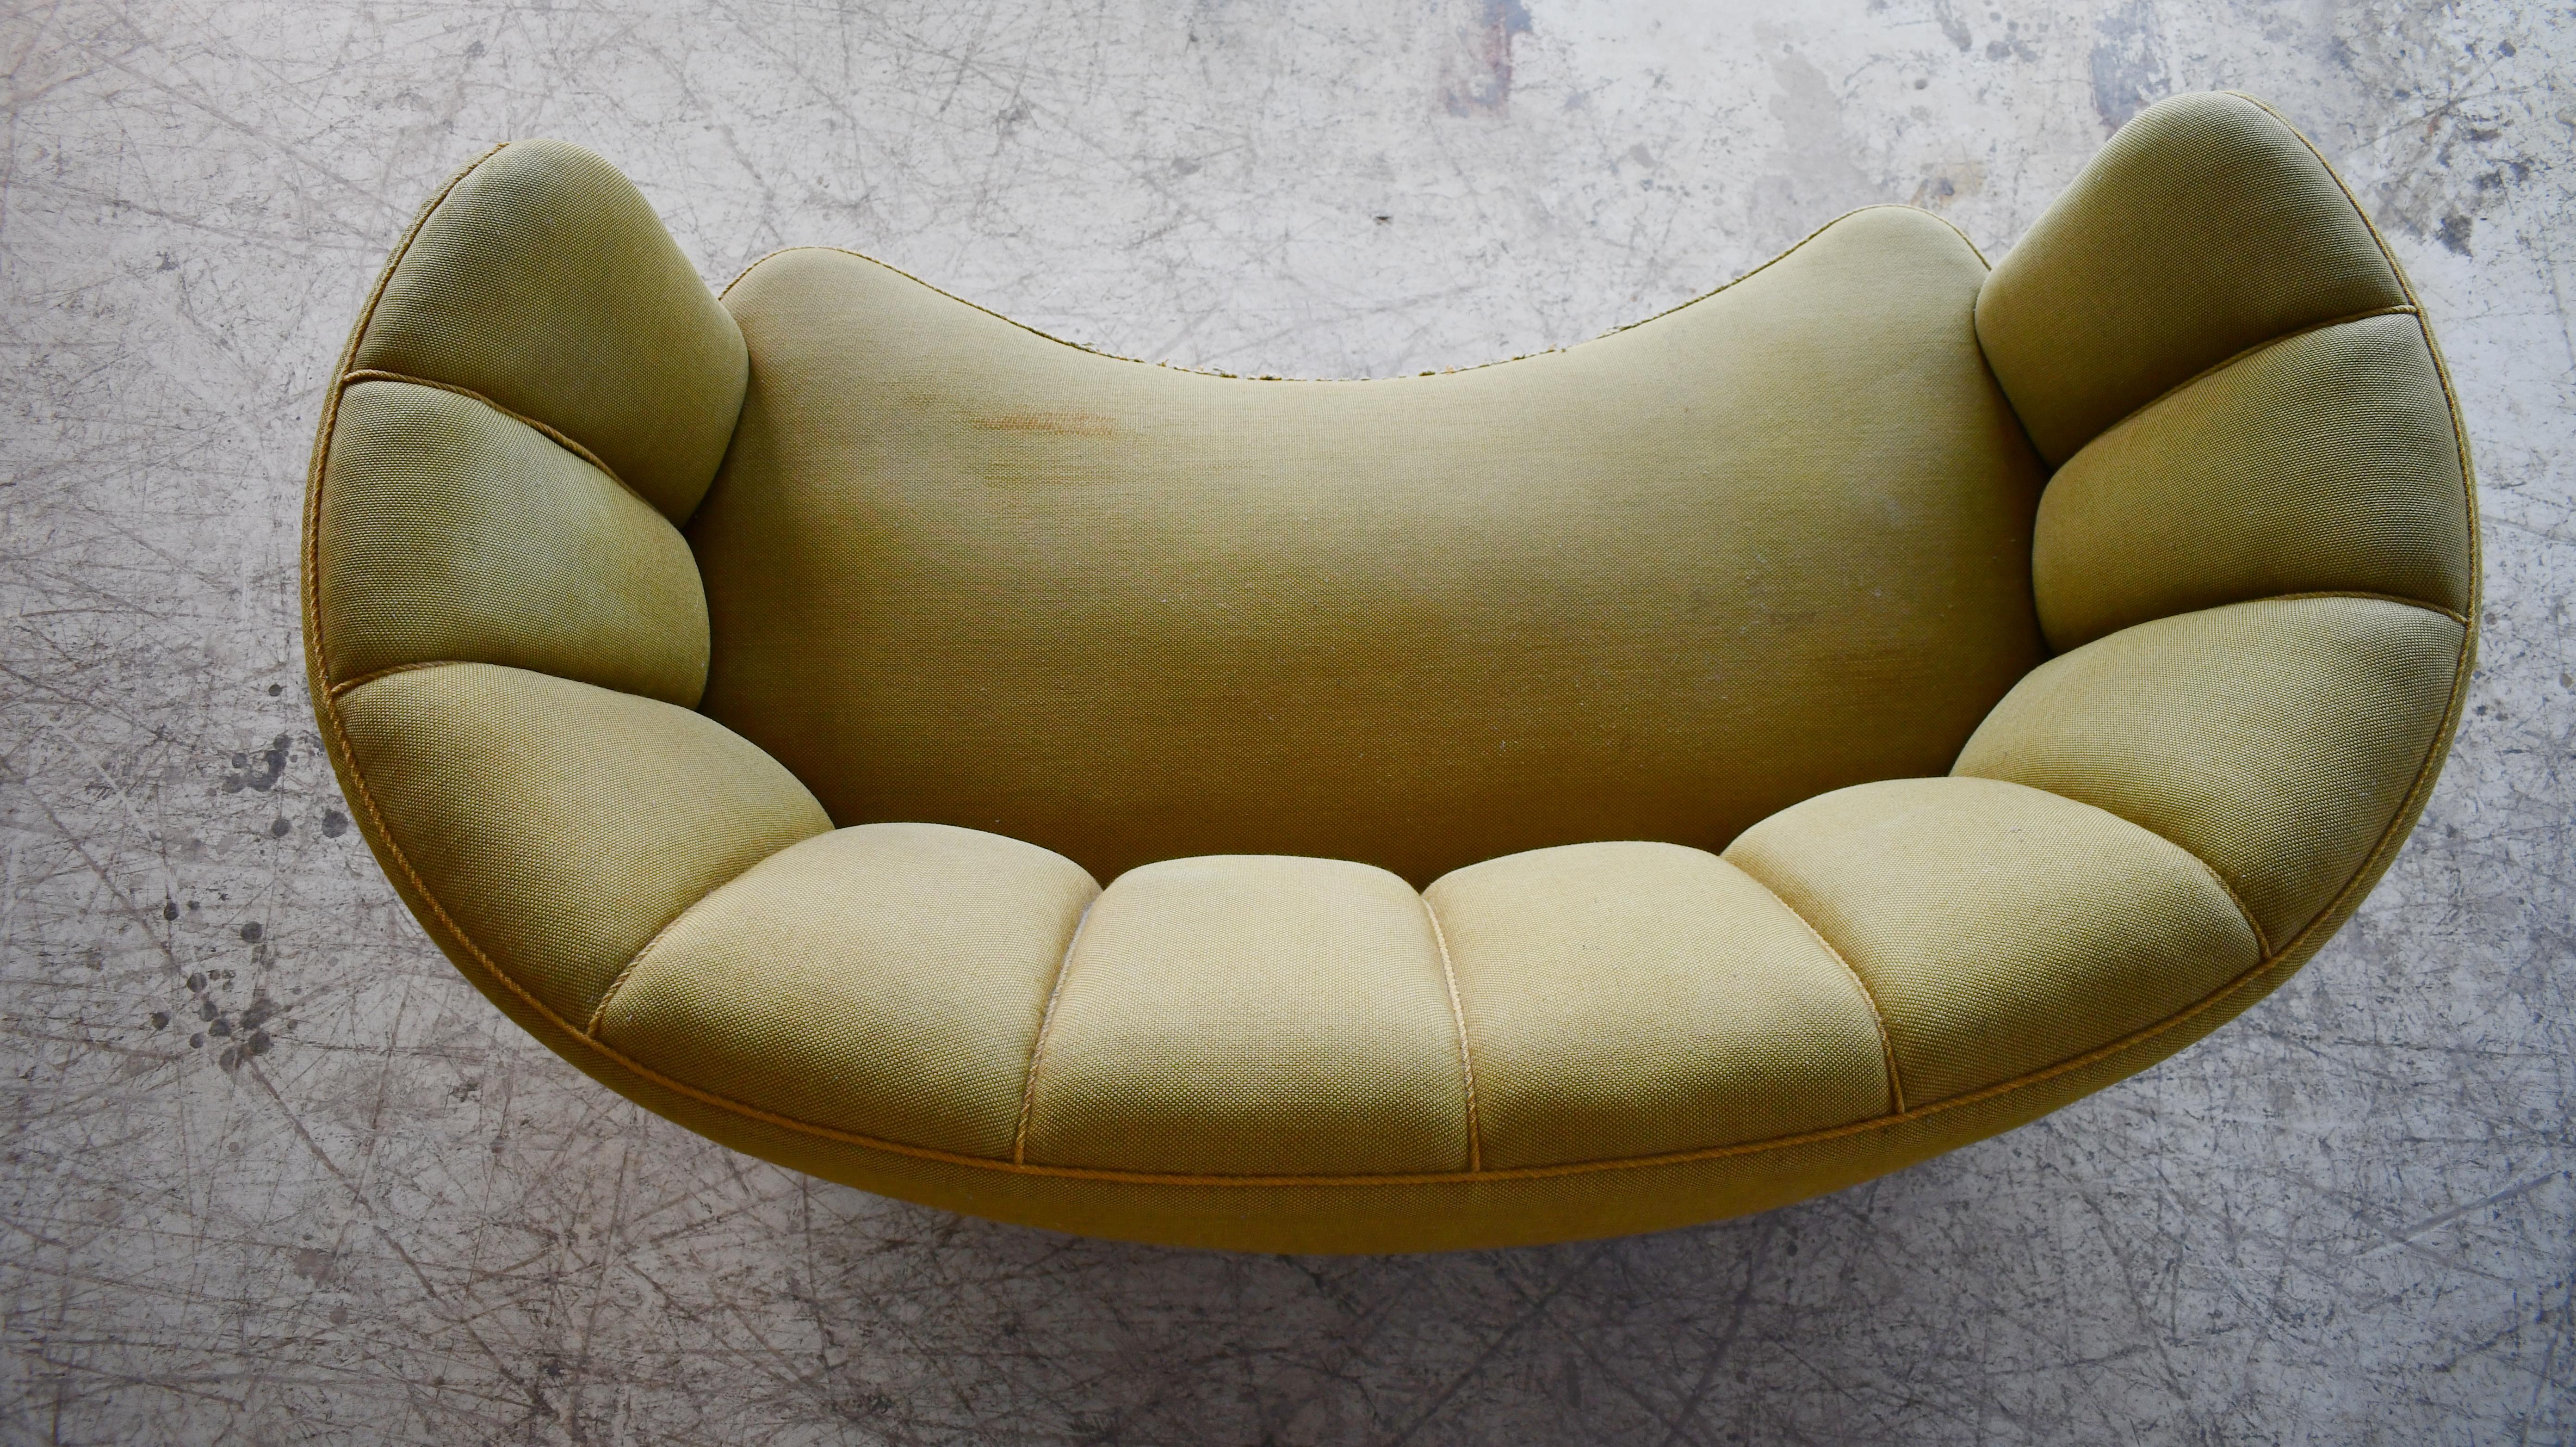 Curved Banana Shape Loveseat or Sofa in Two-Tone Wool, Denmark, 1940s For Sale 1